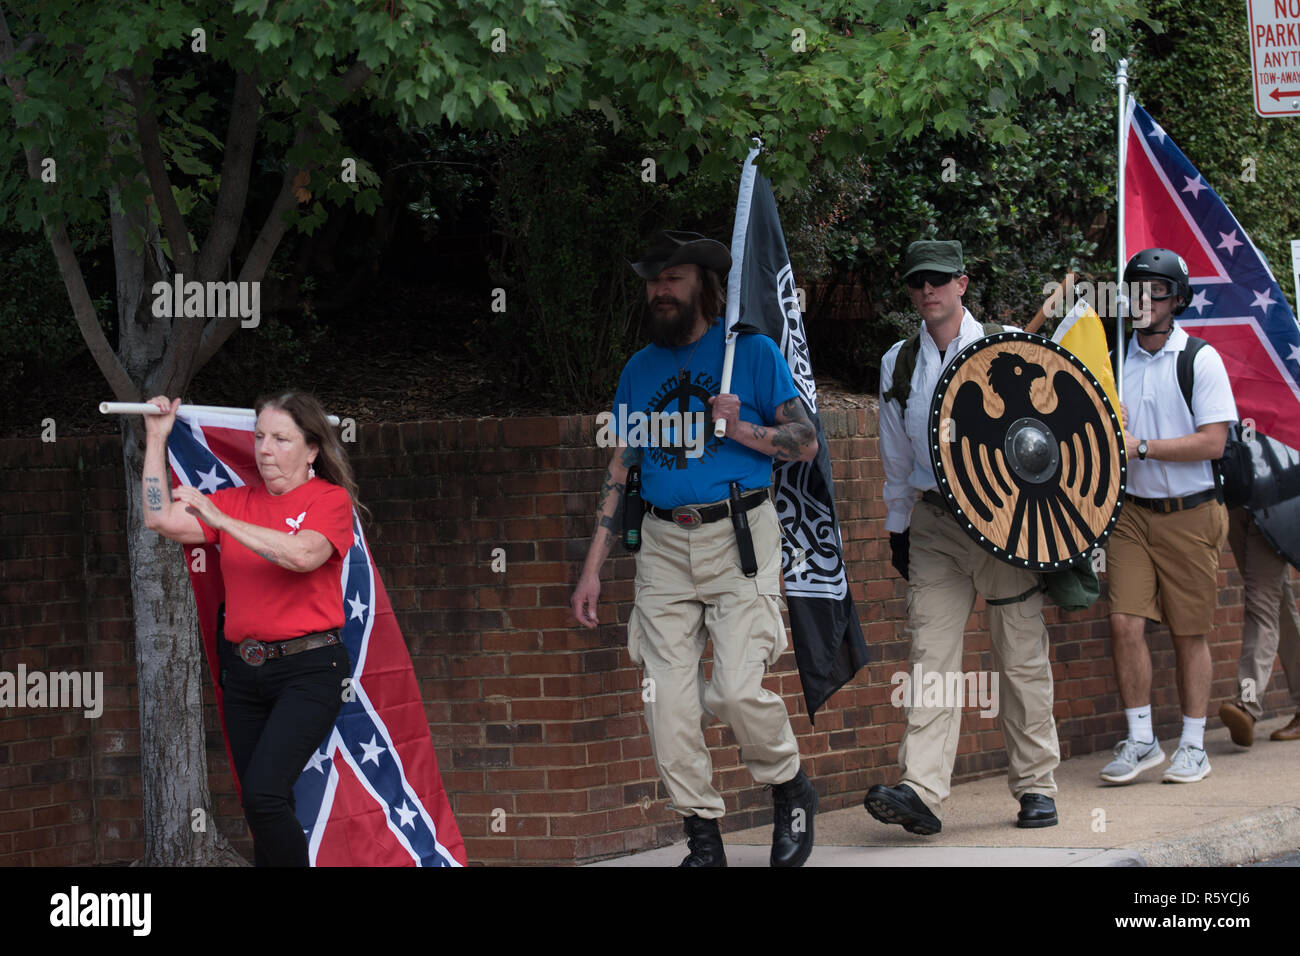 Charlottesville , Virginia , United States - August 12 , 2017 Unite the Right attracts neo-nazi groups and violent protesters Stock Photo